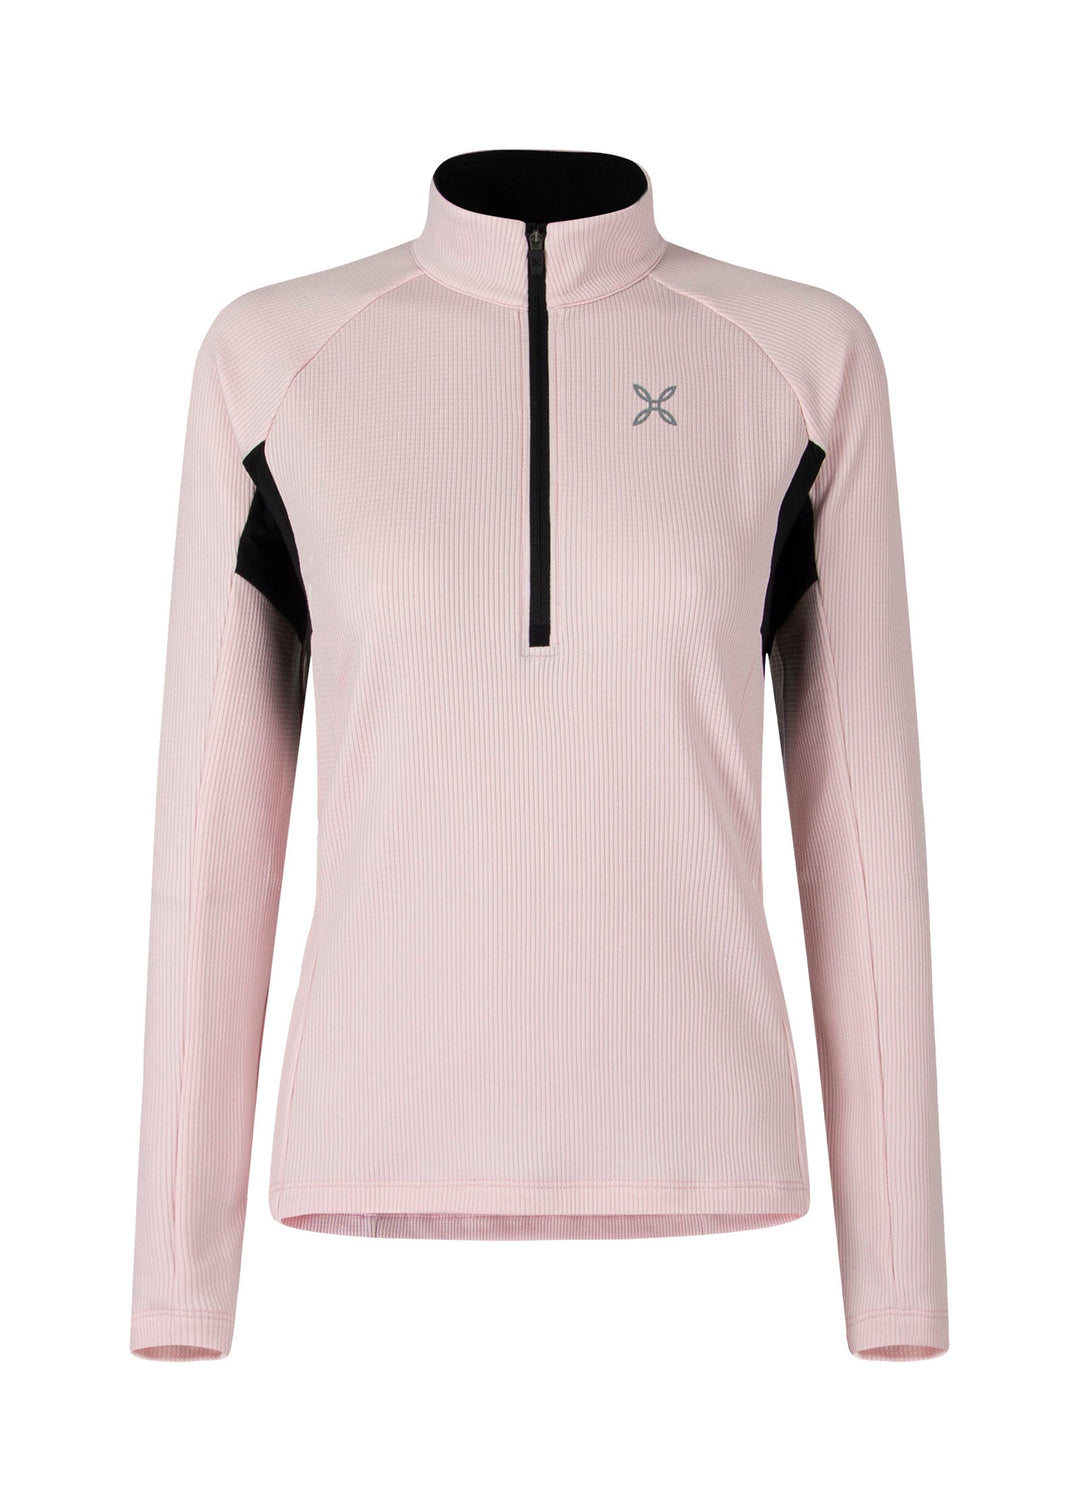 Thermic 4 Maglia Woman - Light Rose (01) - Blogside